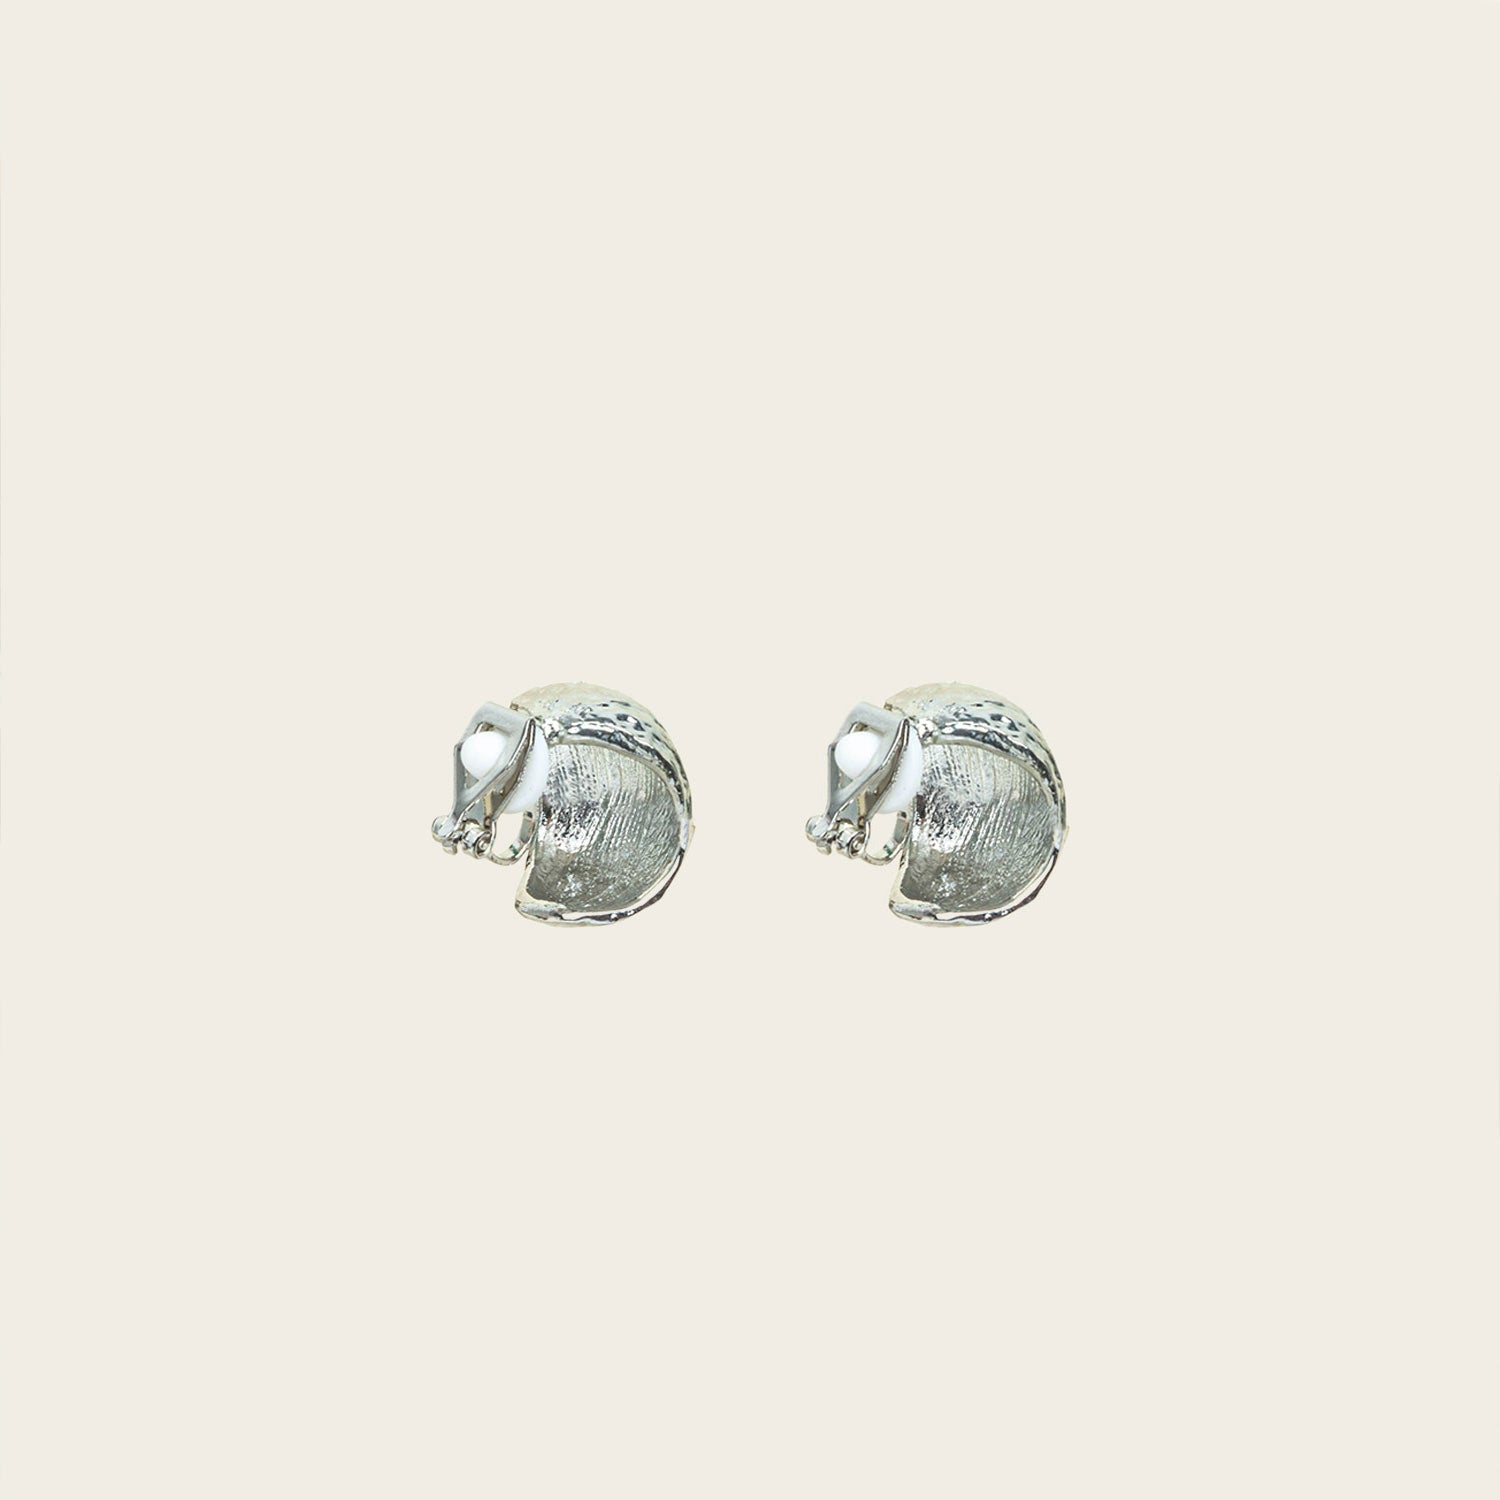 Image of the Alaia Clip On Earrings in Silver feature a padded clip-on closure, offering secure hold and ideal comfort for 8-12 hours of wear, for ear types of all shapes and sizes. Crafted from gold tone copper alloy, these earrings feature a single pair per item.